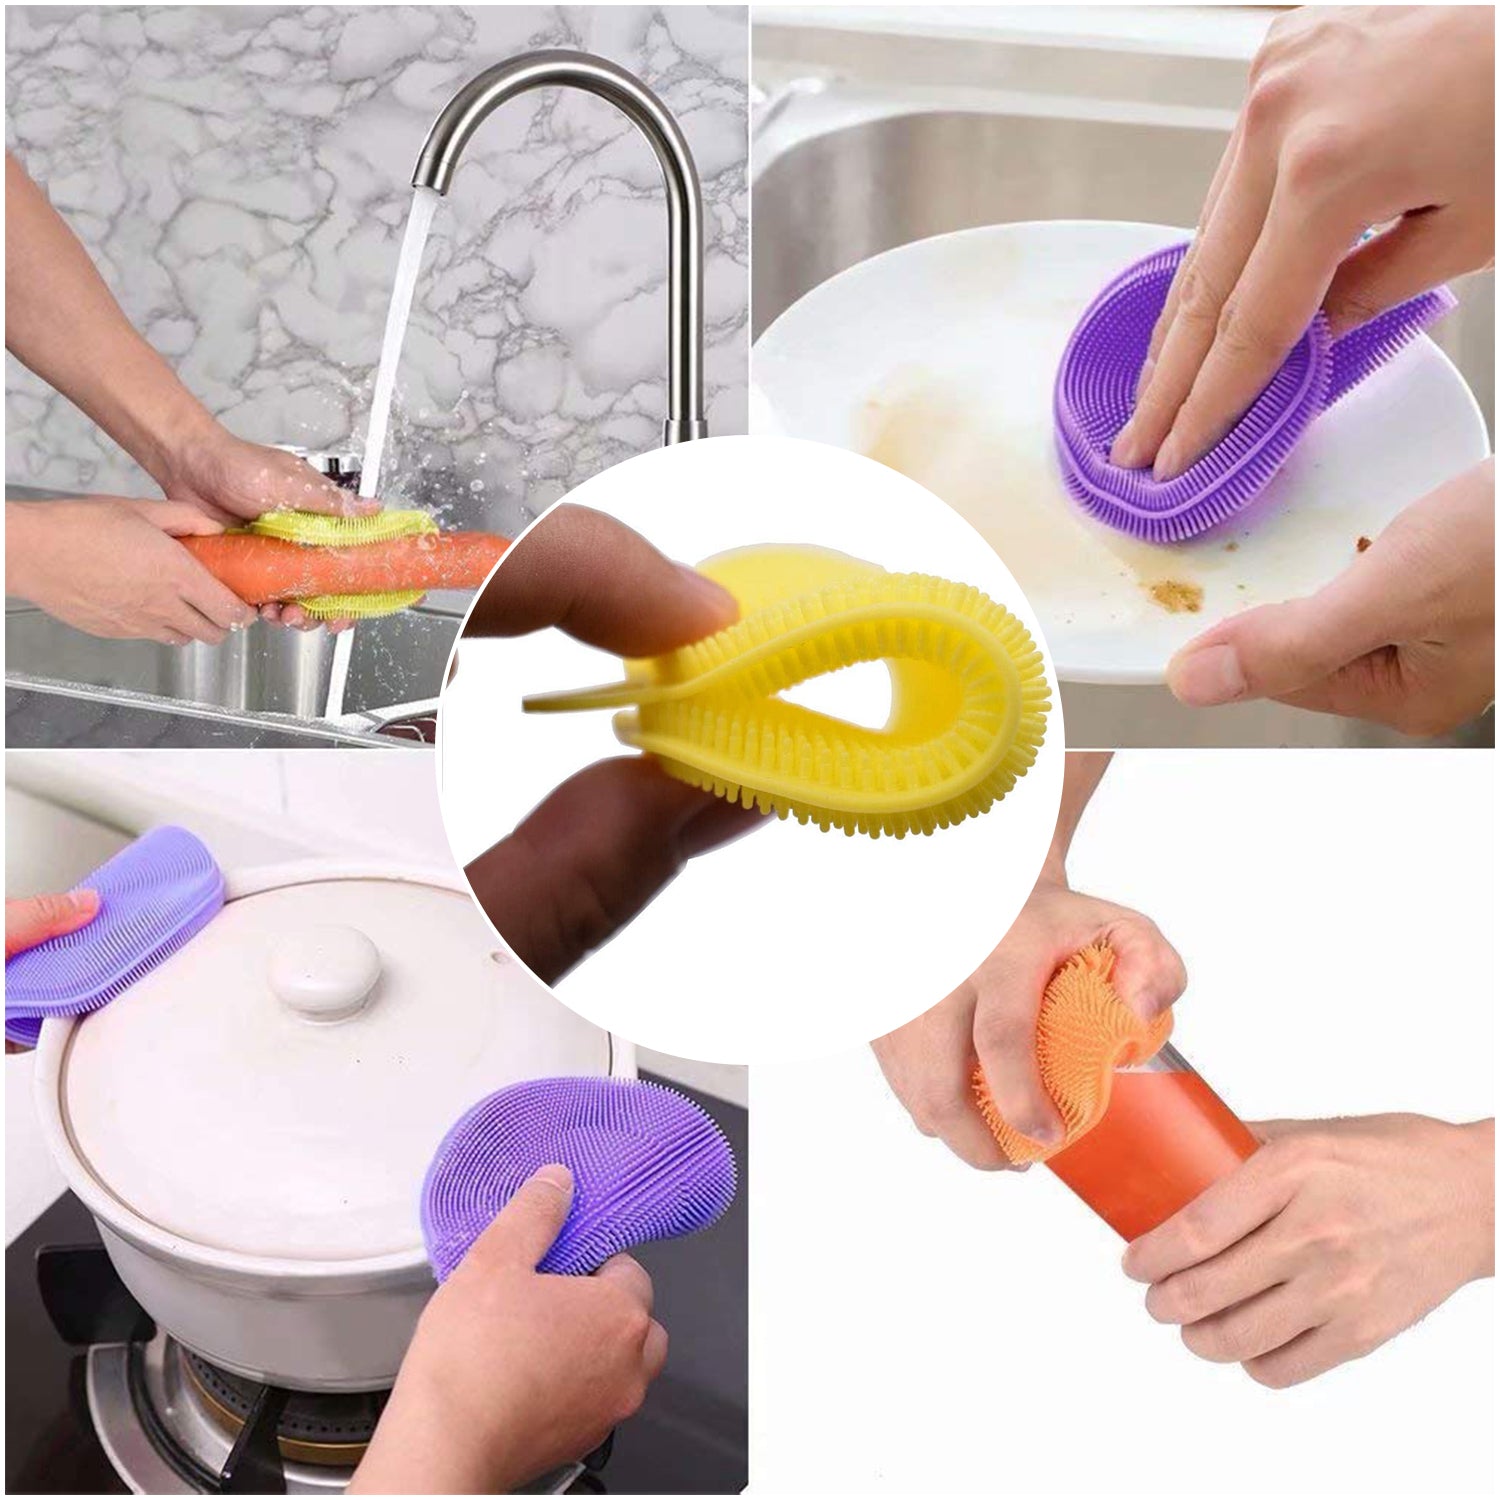 1344A Cleaning Supplies Sponges Silicone Scrubber for Kitchen Non Stick Dishwashing & Baby Care Sponge Brush Household Health Tool( Pack of 5pc). 